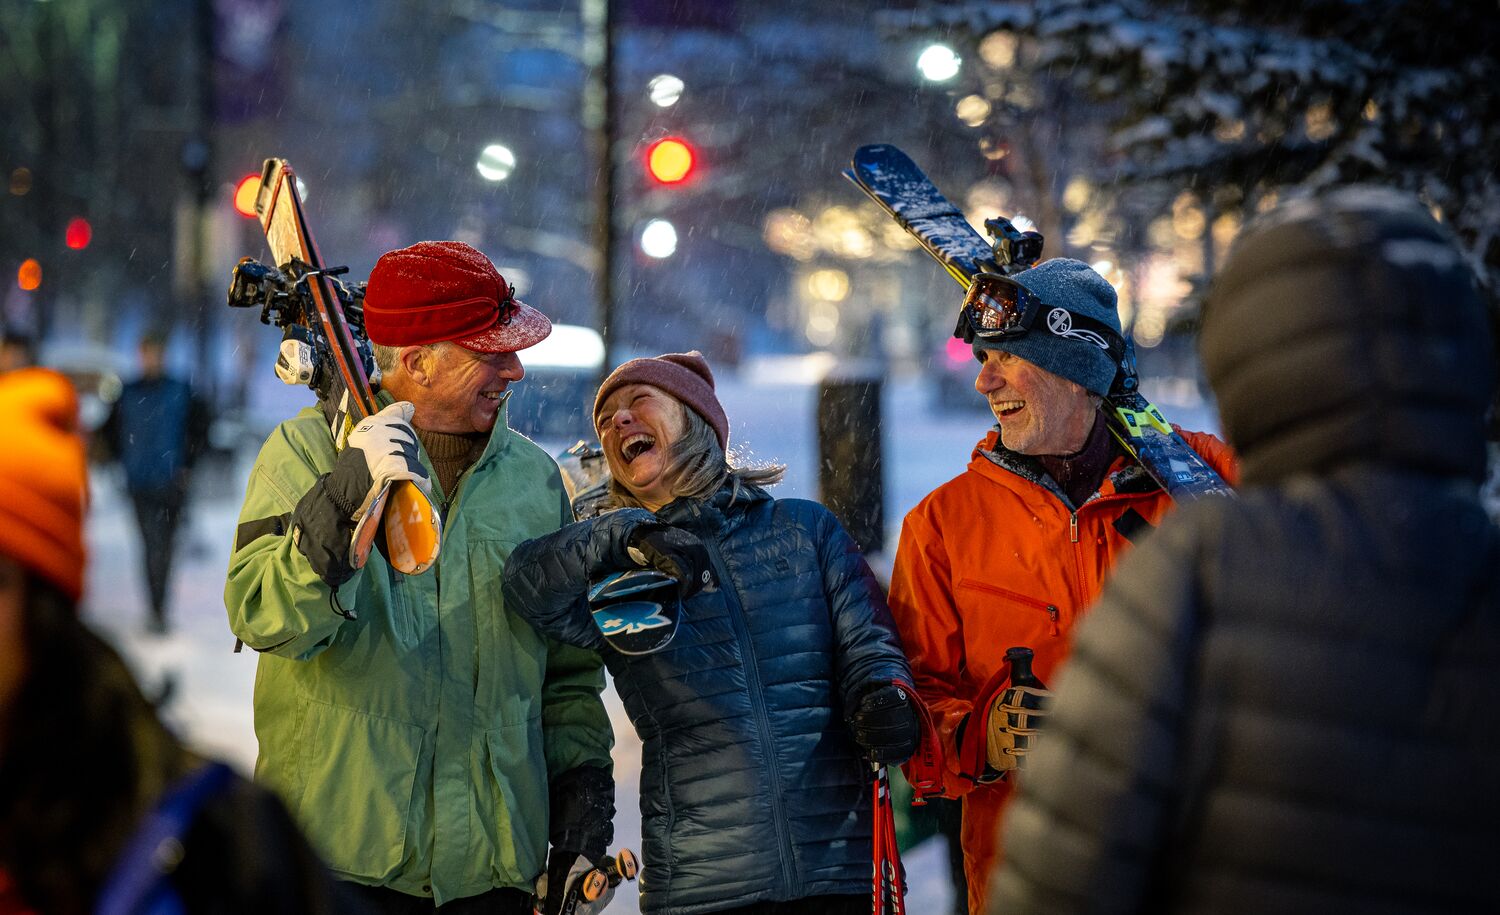 Three friends walk through the Banff Town with their skis on a snowy winter day in Banff National Park